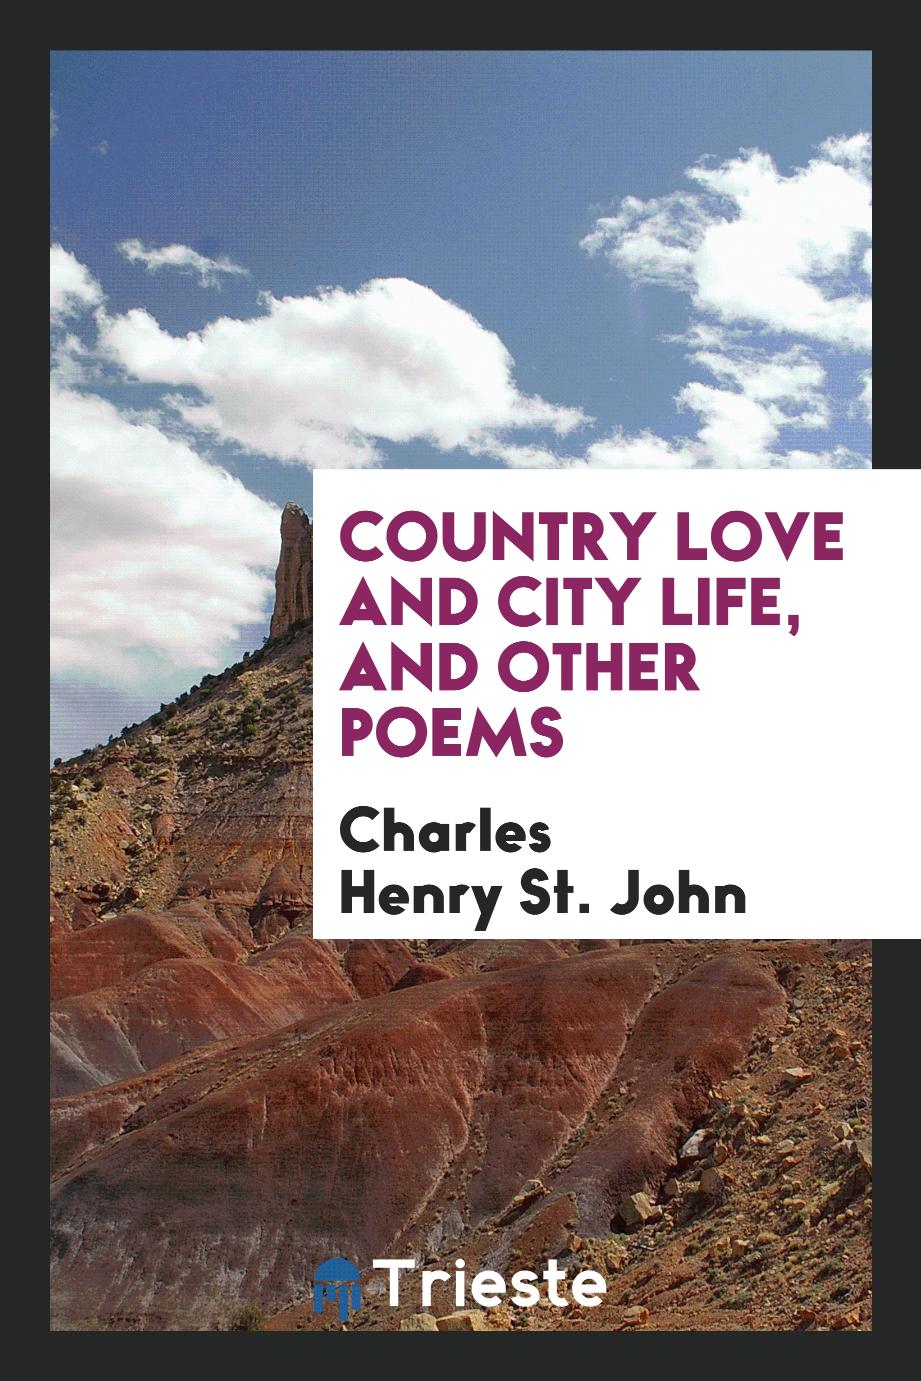 Country love and city life, and other poems